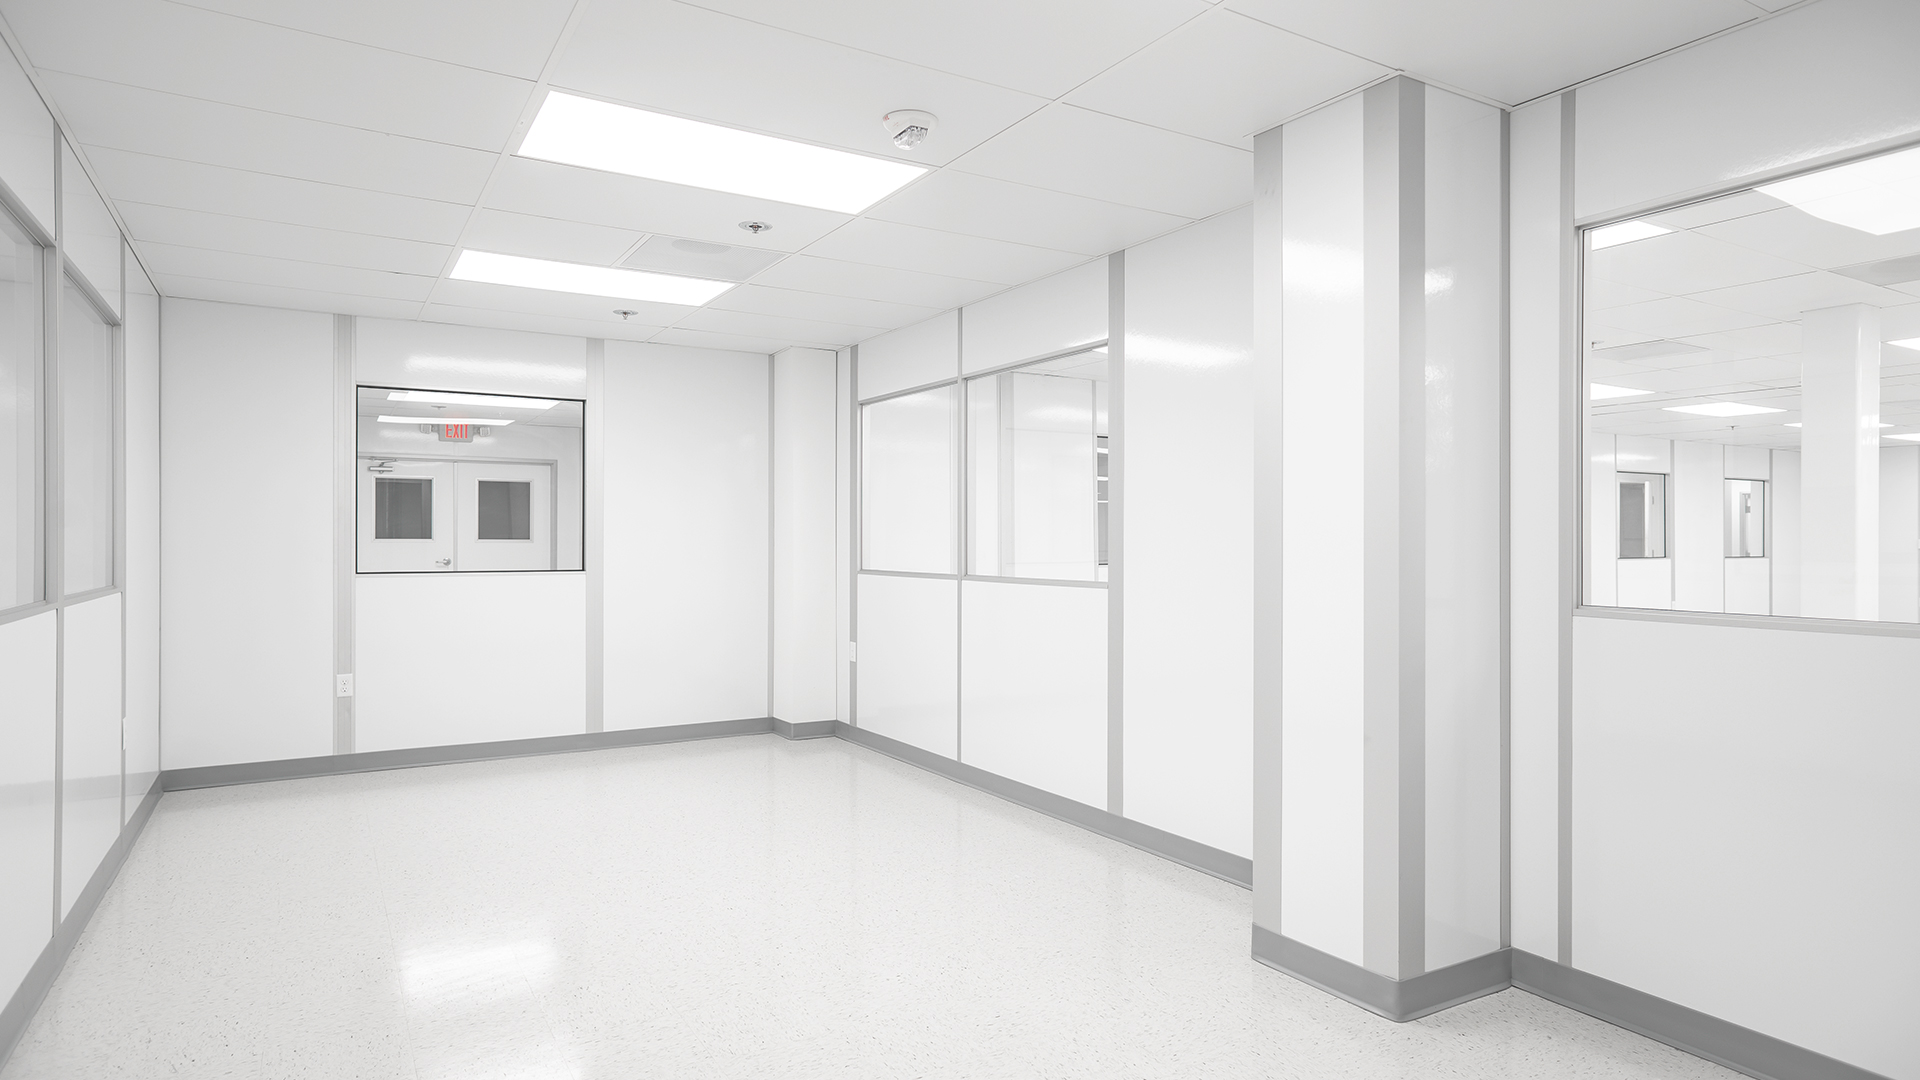 Modular Cleanroom by allied cleanrooms Clean room by Allied Cleanrooms Supplier - USP 797, and ISO 4, ISO 5, ISO 6, ISO 7, and IS0 8, cGMP cleanroom manufacturing, soft wall cleanrooms FED-STD-209E and ISO 14644-1, control contamination